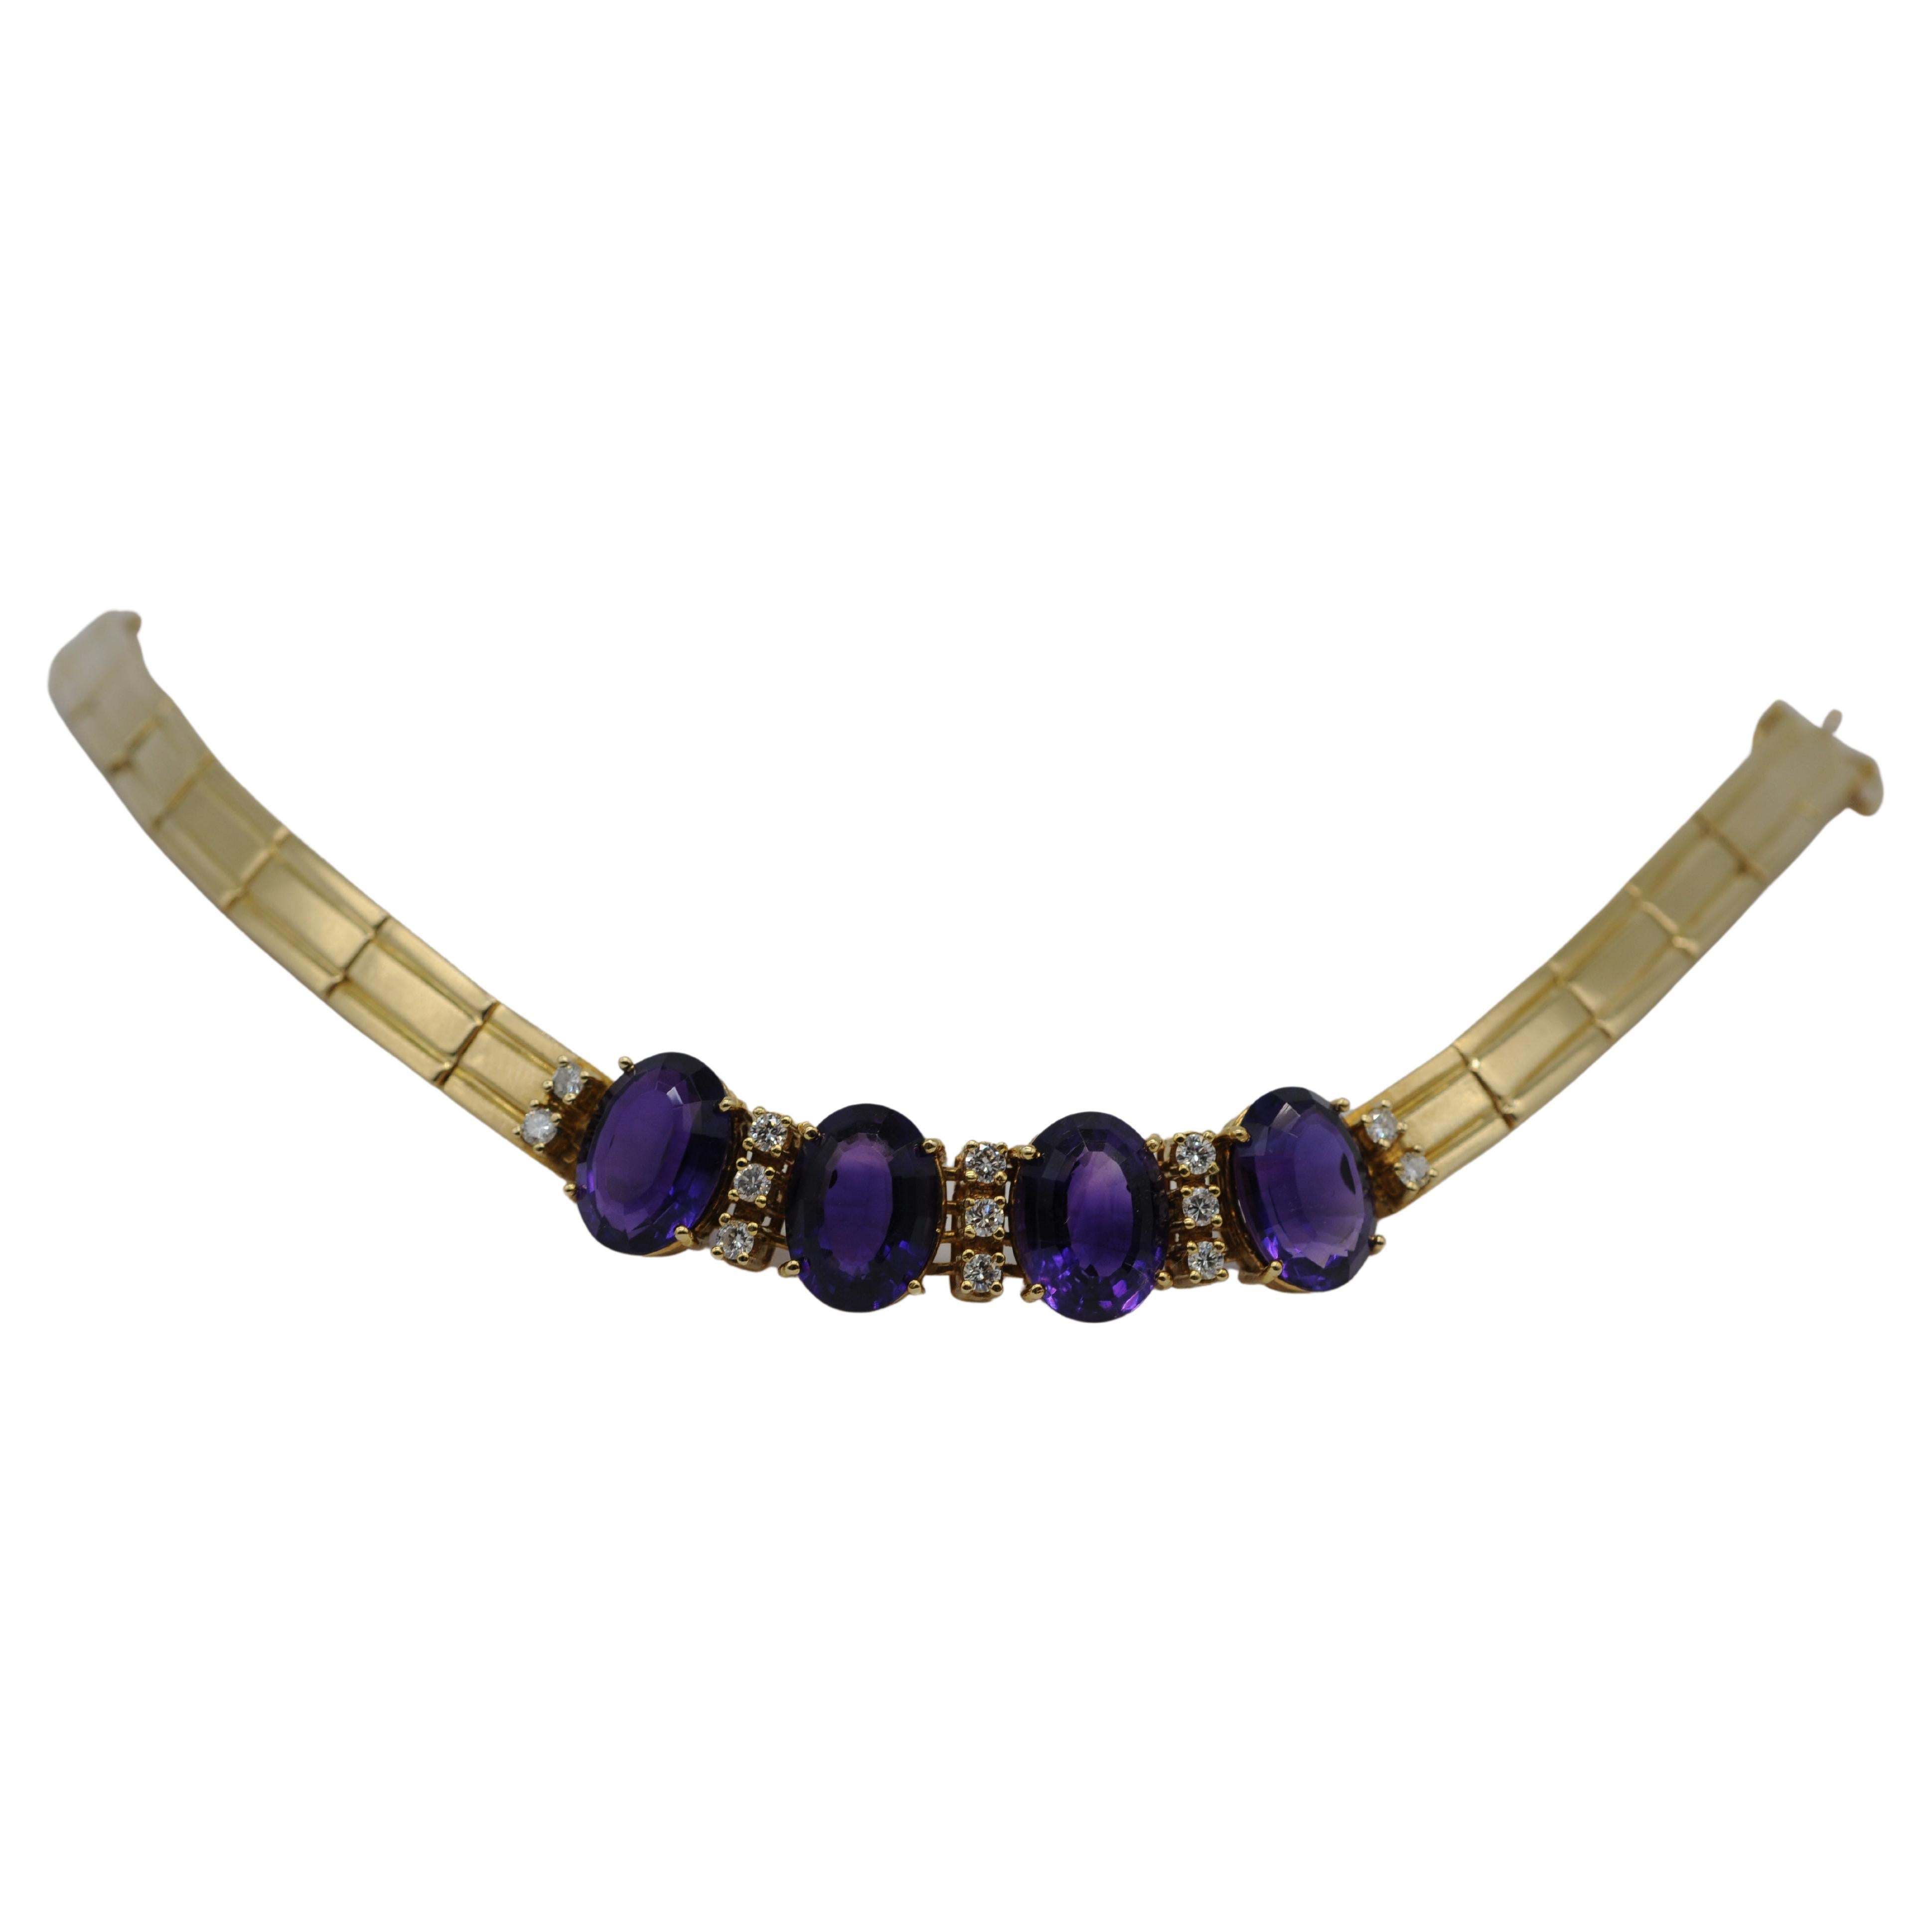 Bracelet with amethysts and diamonds in 18k gold